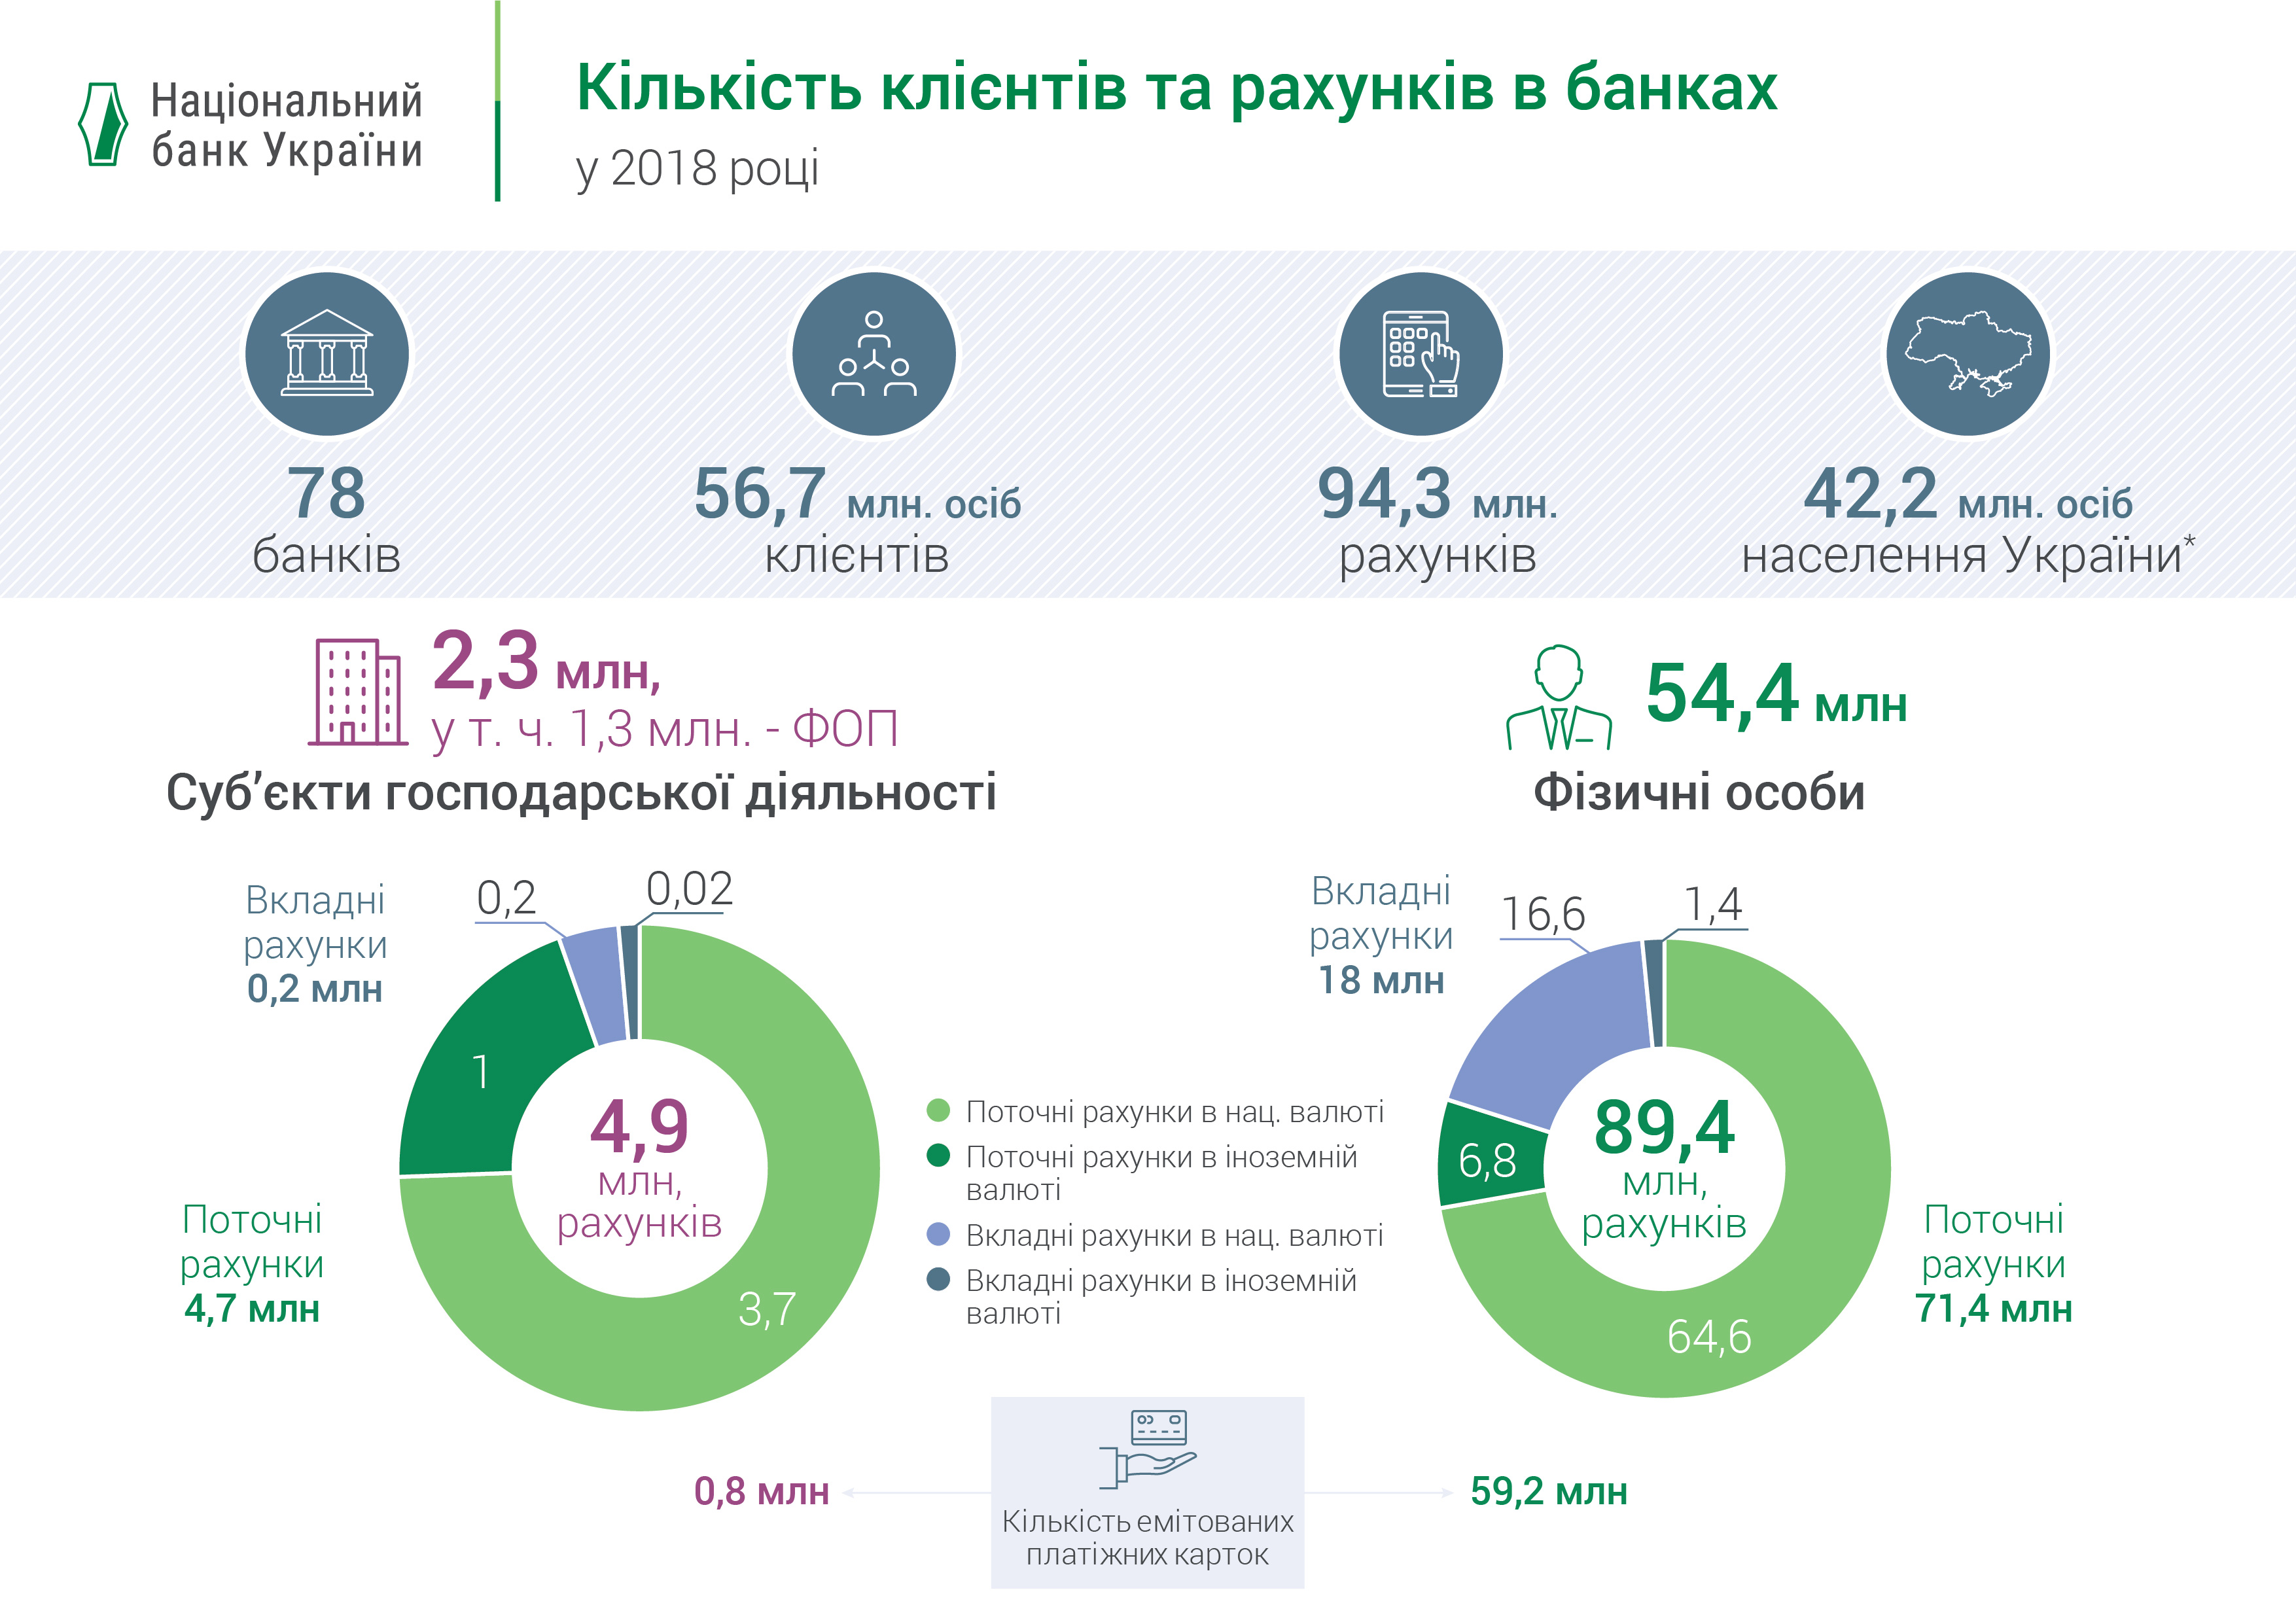 Number of customers and bank accounts, 2018 (UKR)